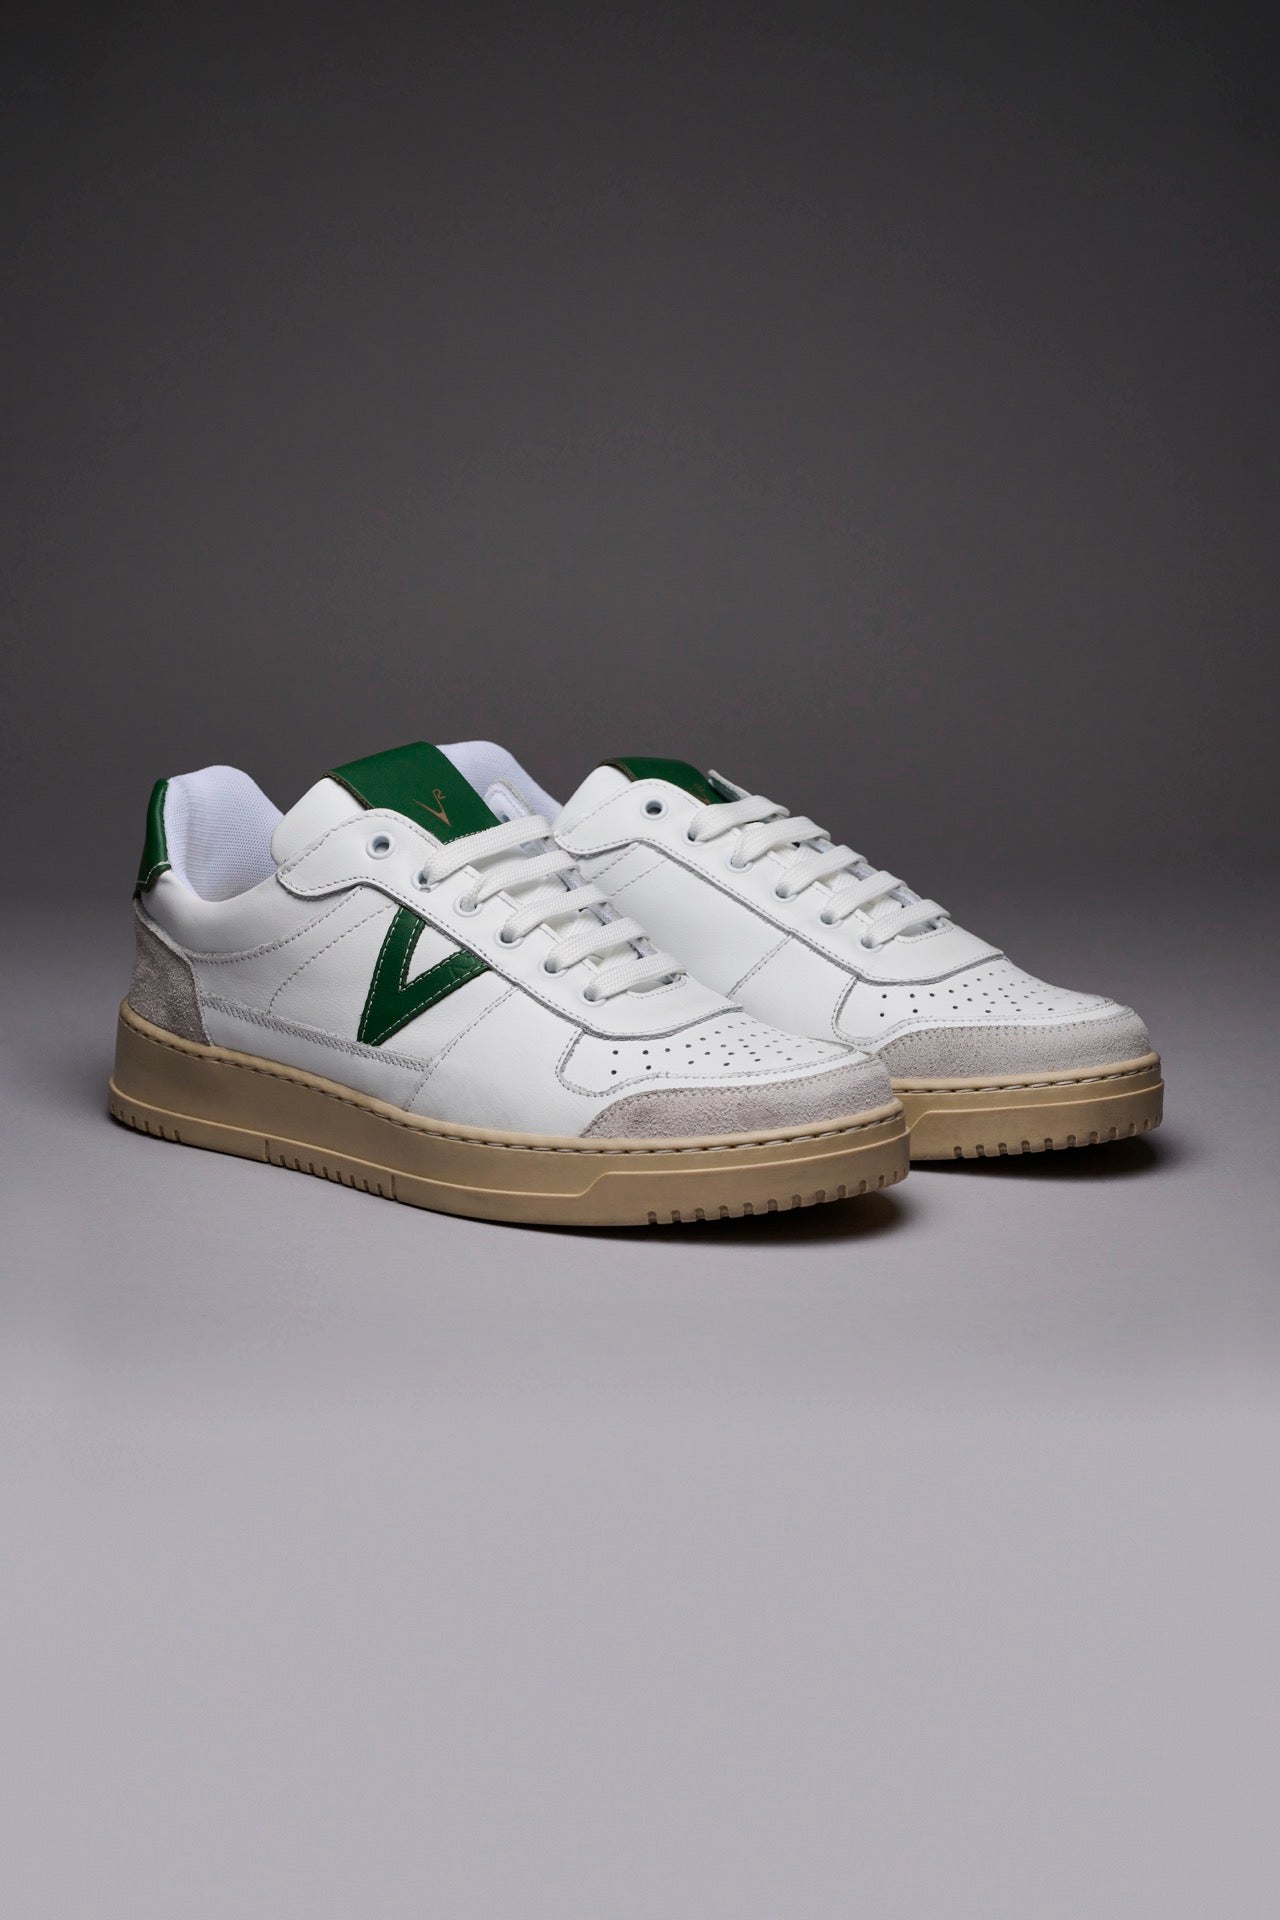 COLLEGE - White Sneakers with Green back and insert